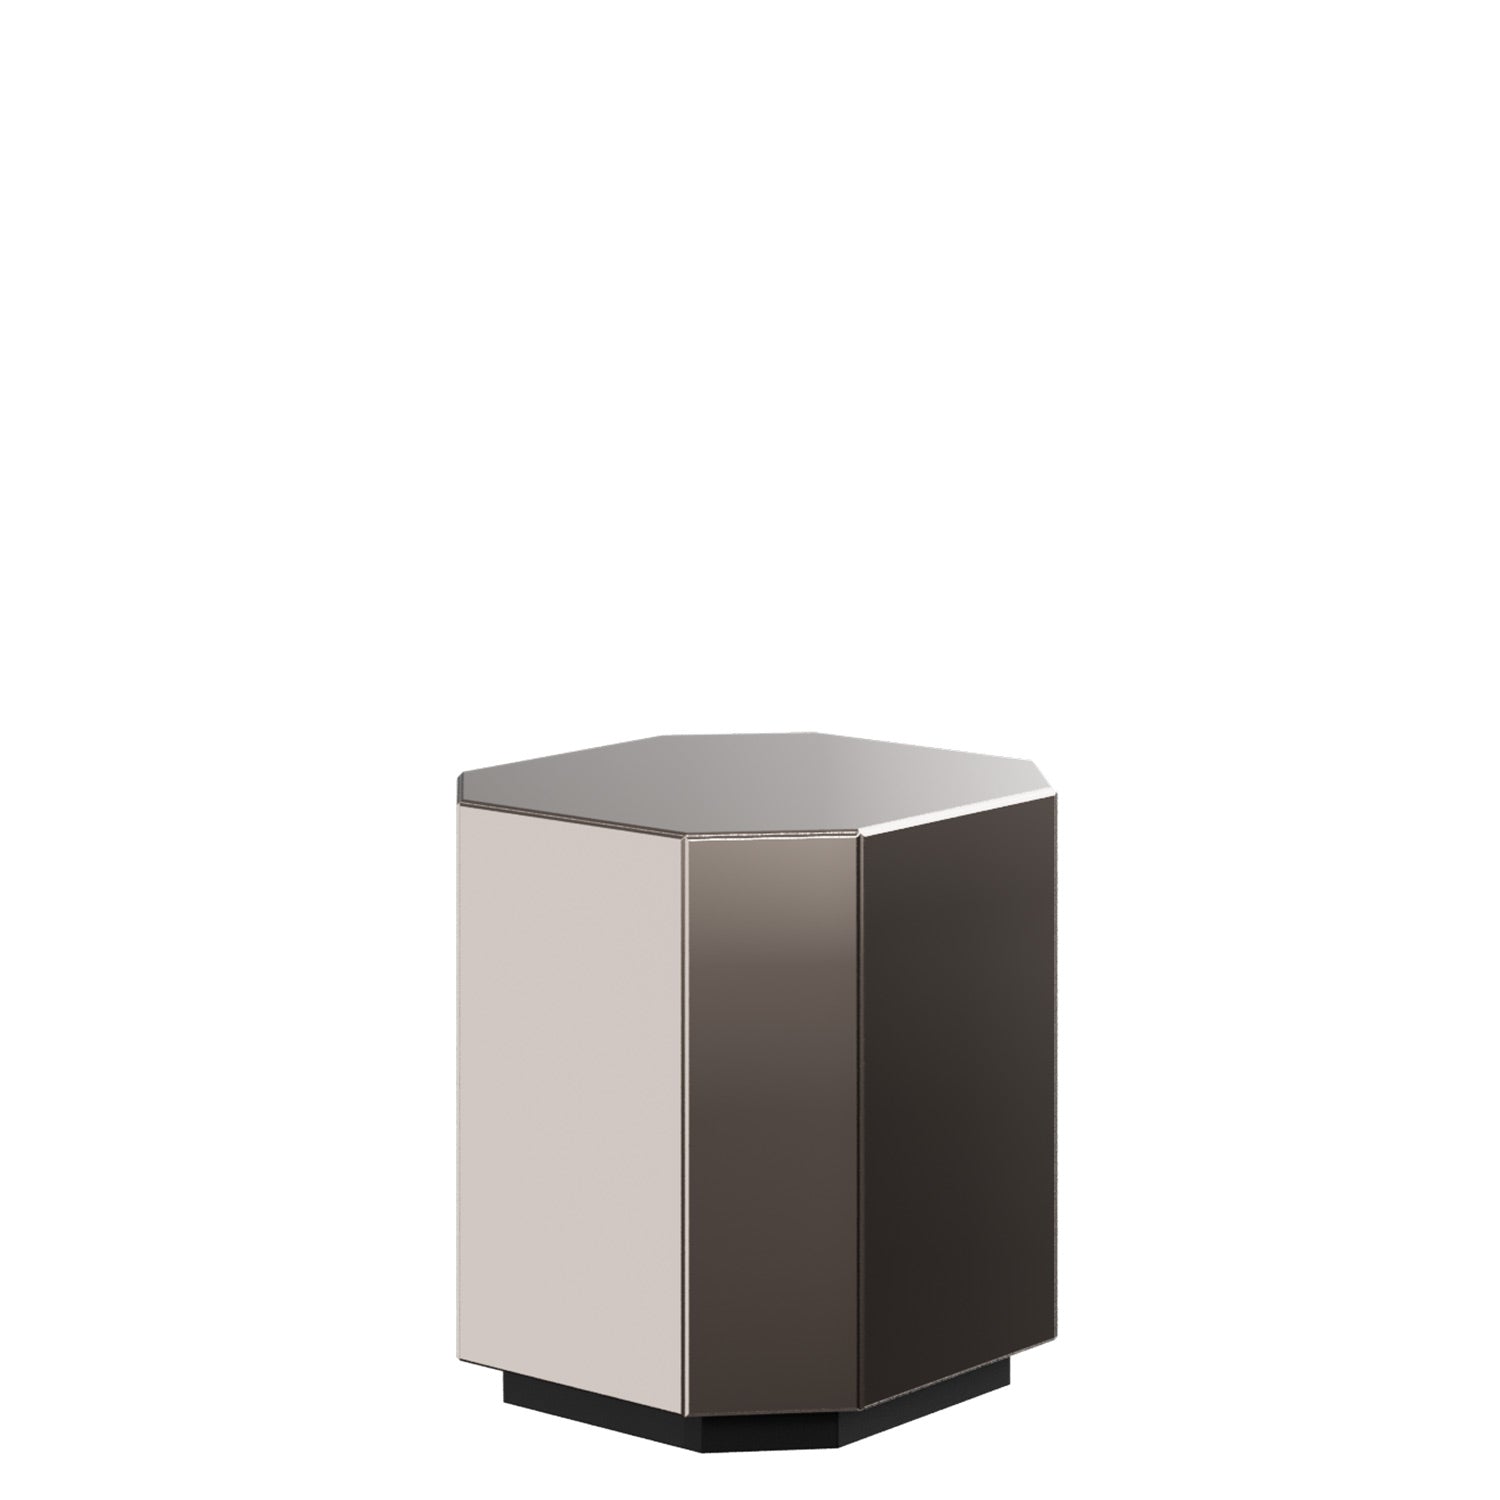 Vada low side table